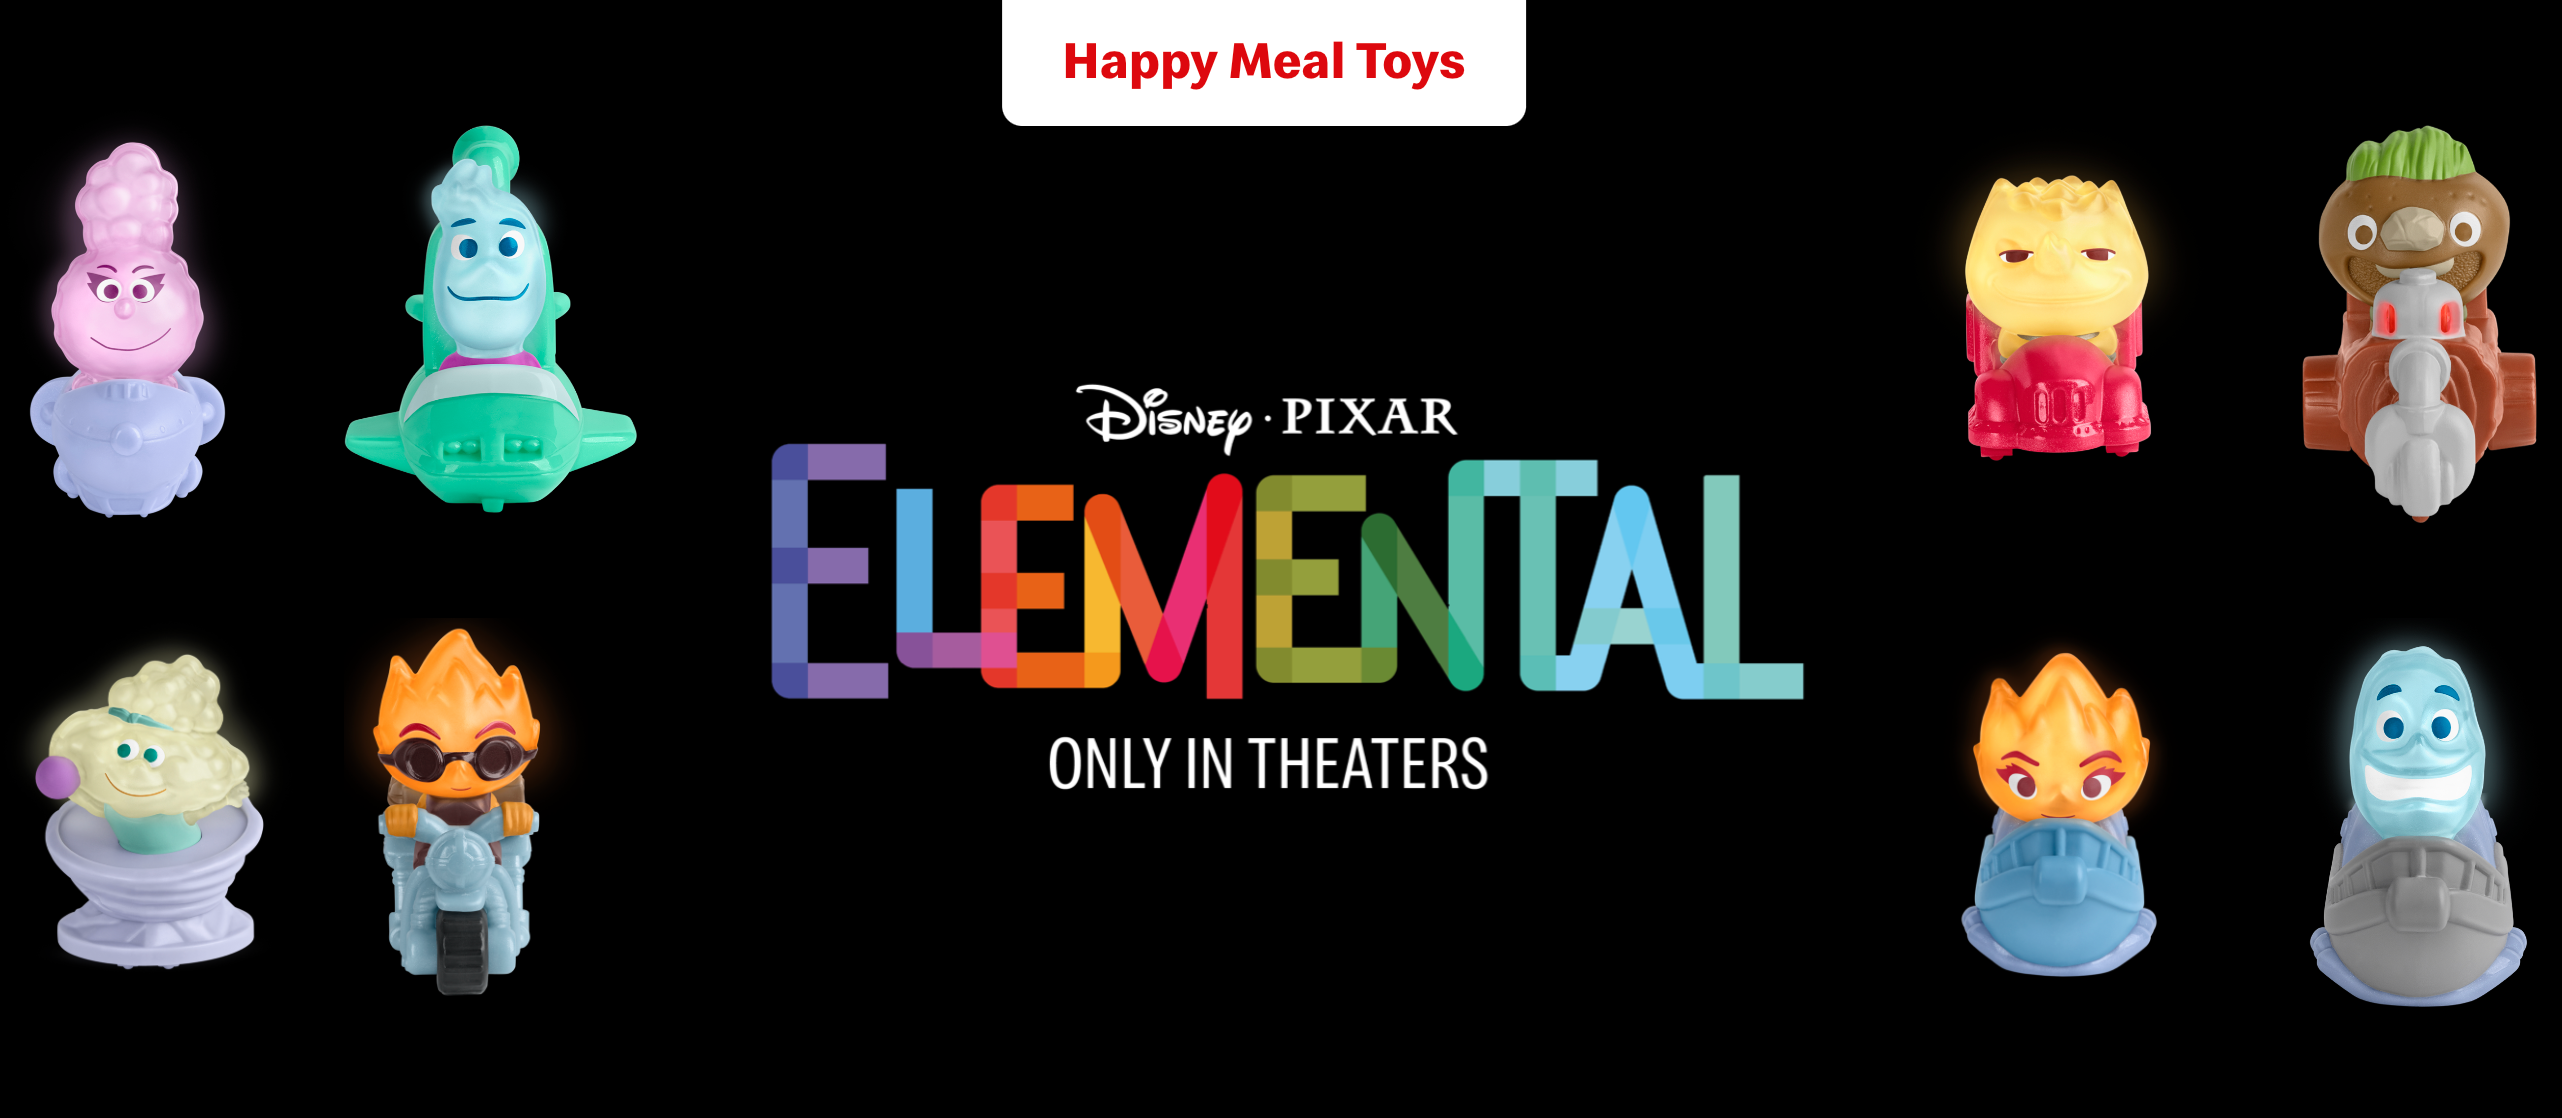 NEW Disney Happy Meal Toys Now Available at McDonald’s! Disney by Mark